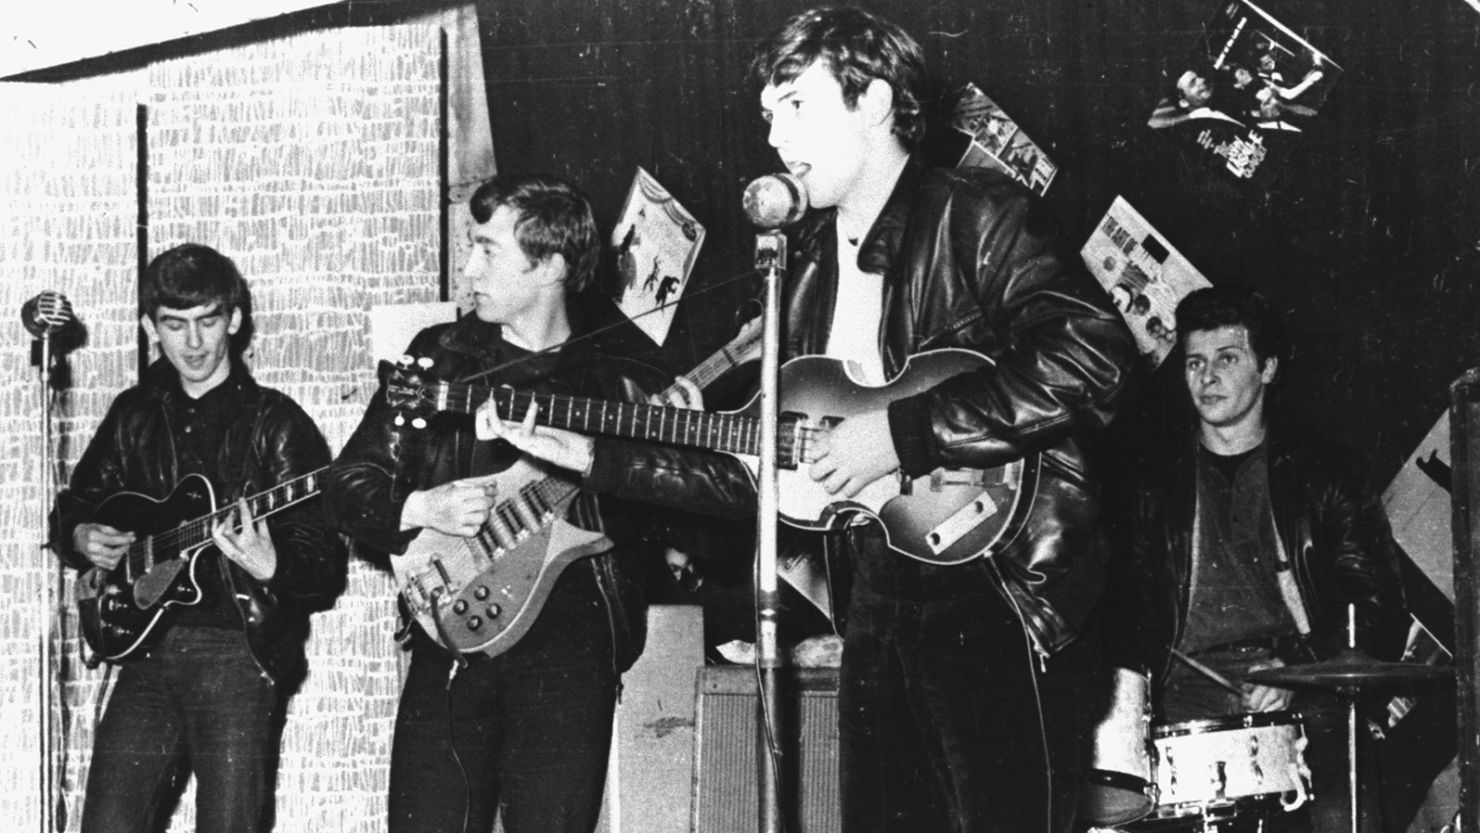 British rock group The Beatles perform in a club  prior to signing their first recording contract, Liverpool, England, 1962.